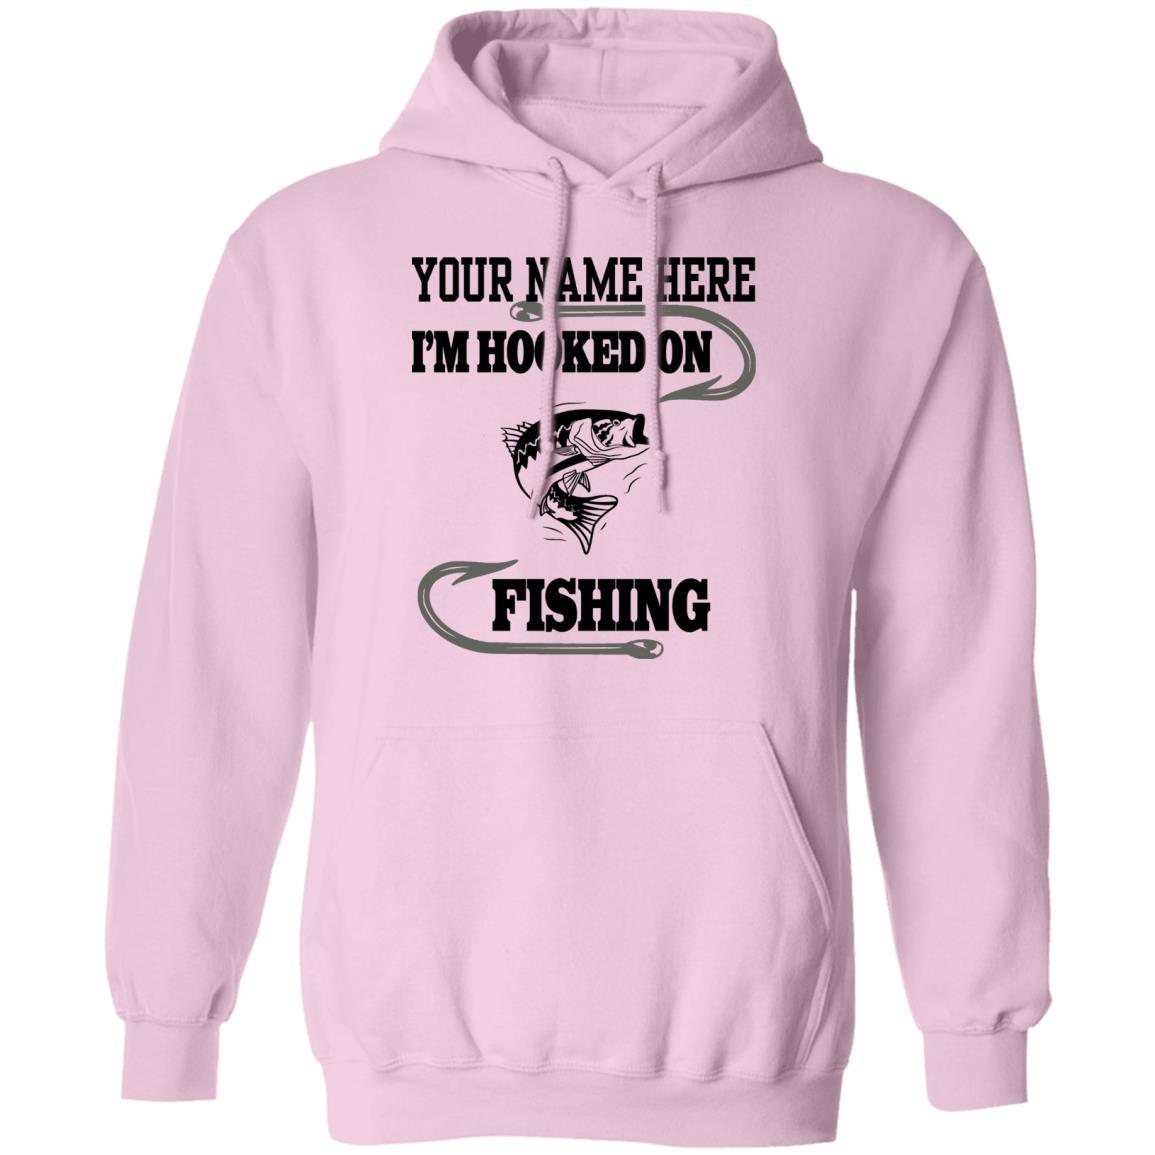 I'm Hooked On Fishing Pullover Hoodie b – Fishing Chalet